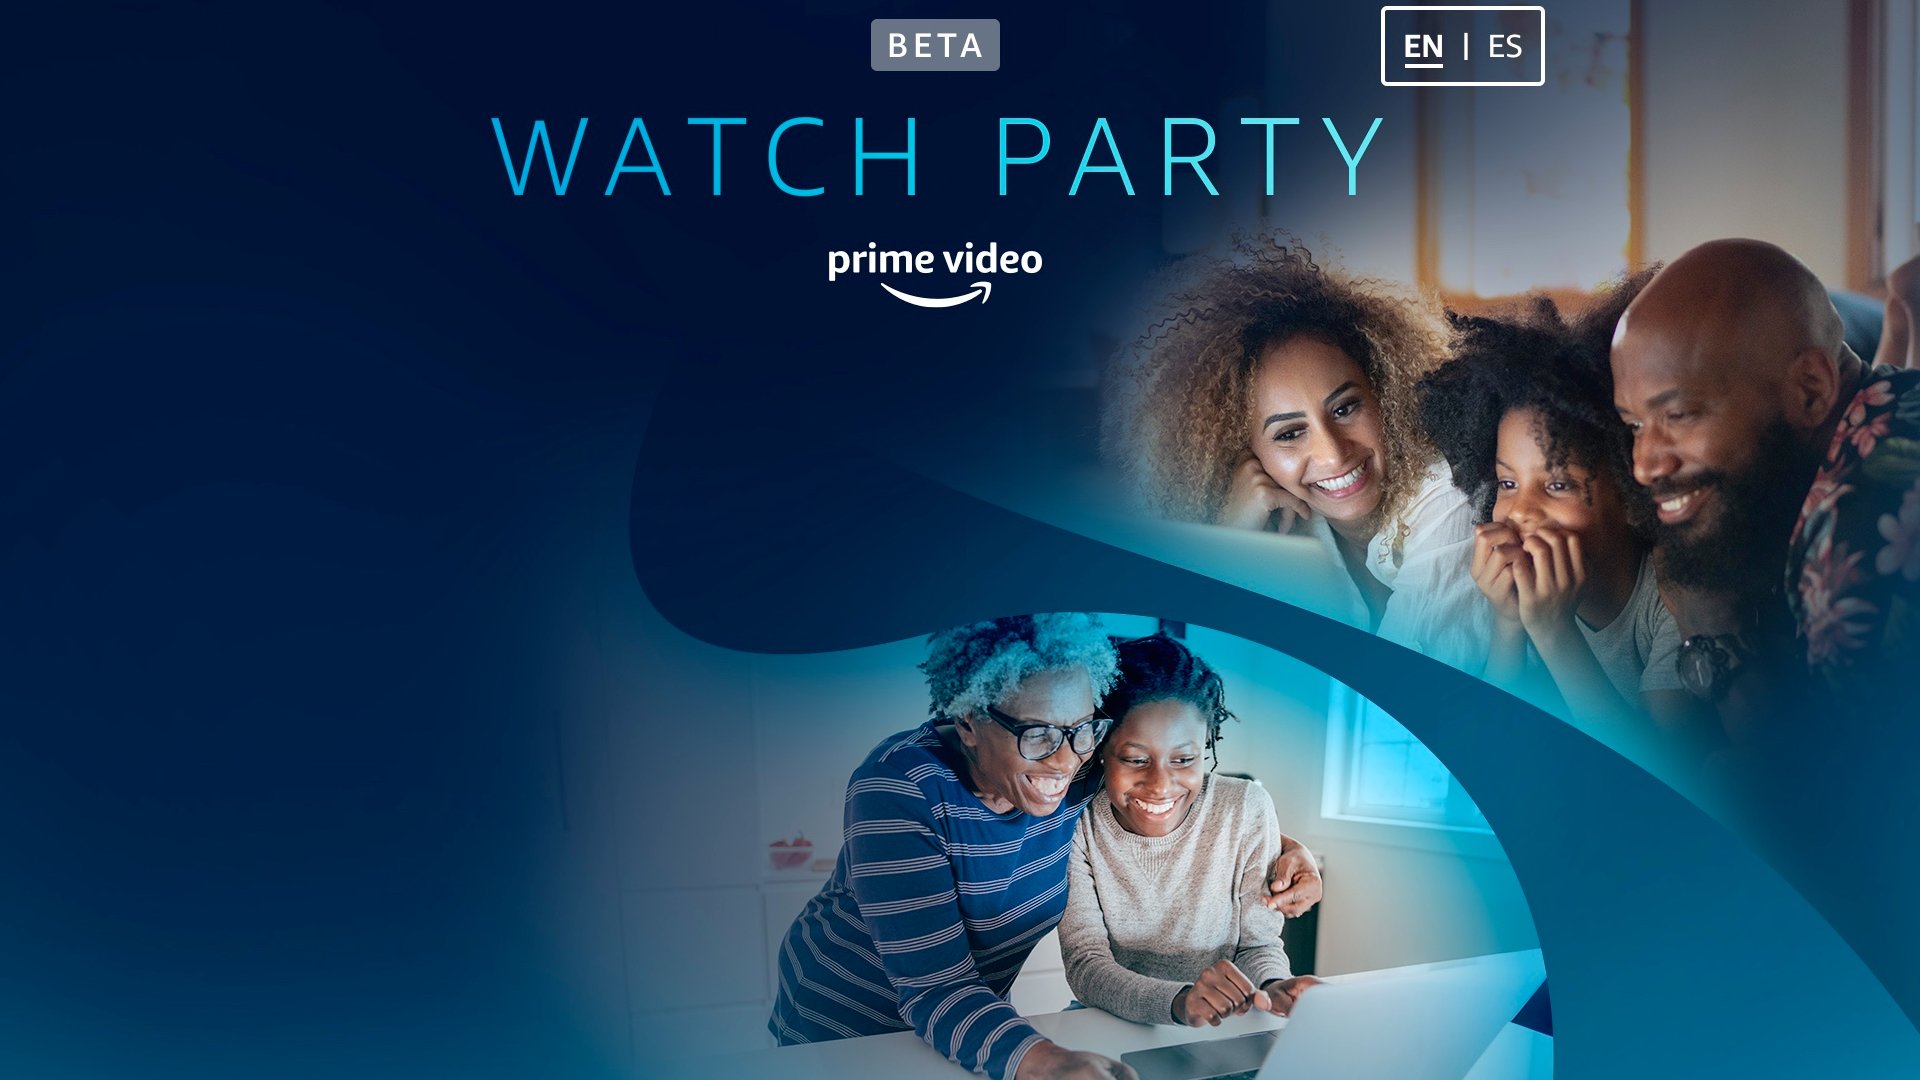 Prime launches a Watch Party feature